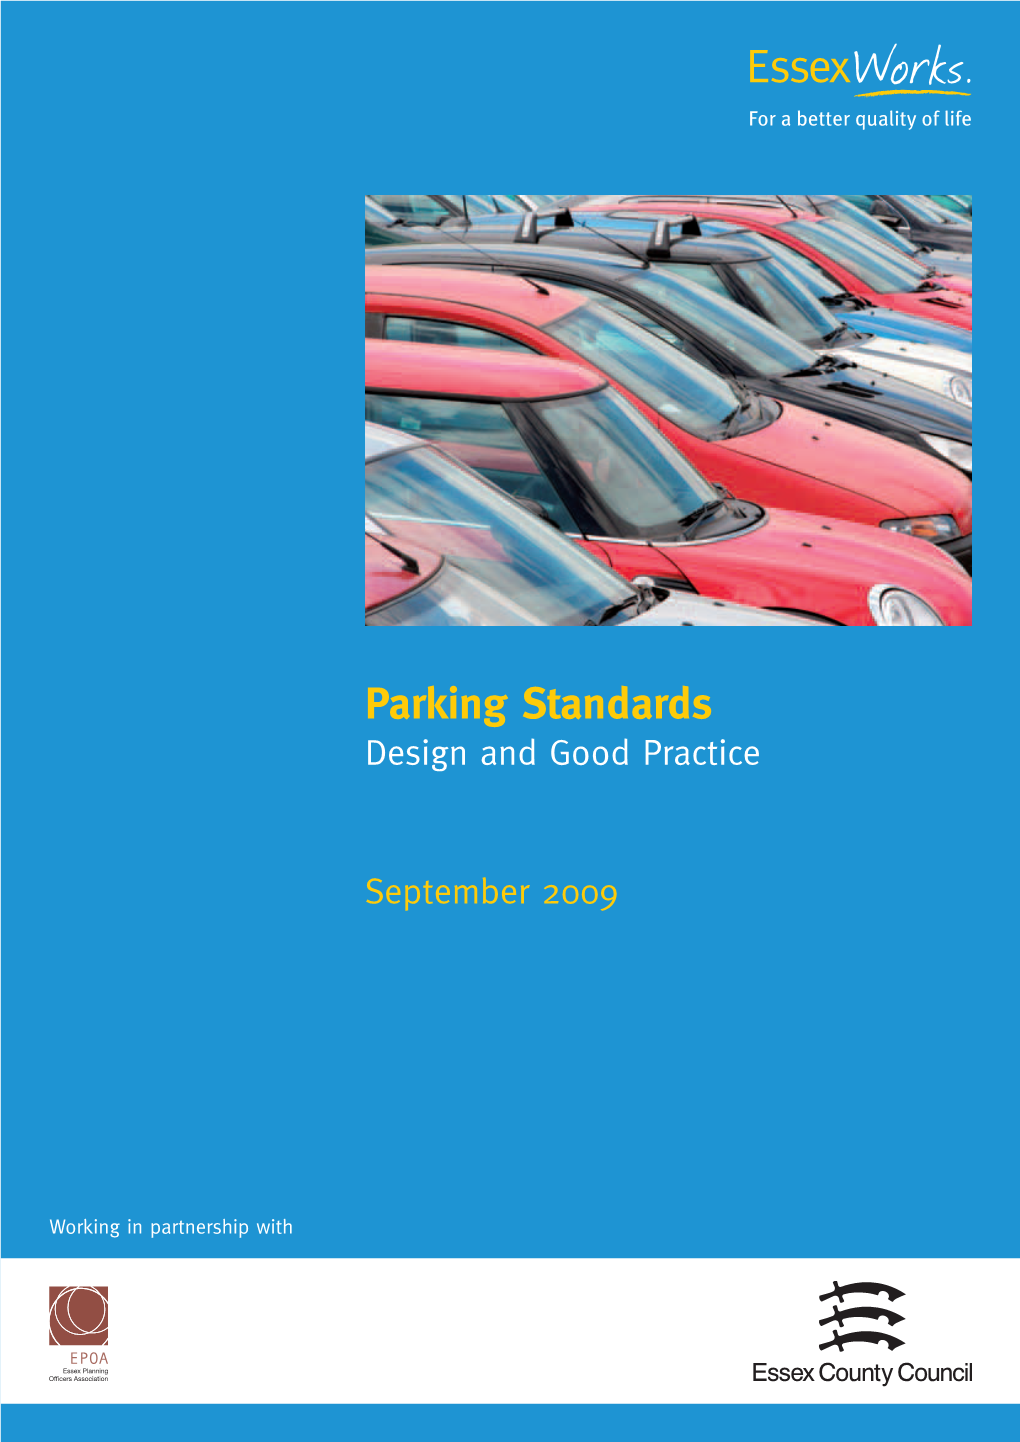 Essex County Council Revised Vehicle Parking Standards 2009